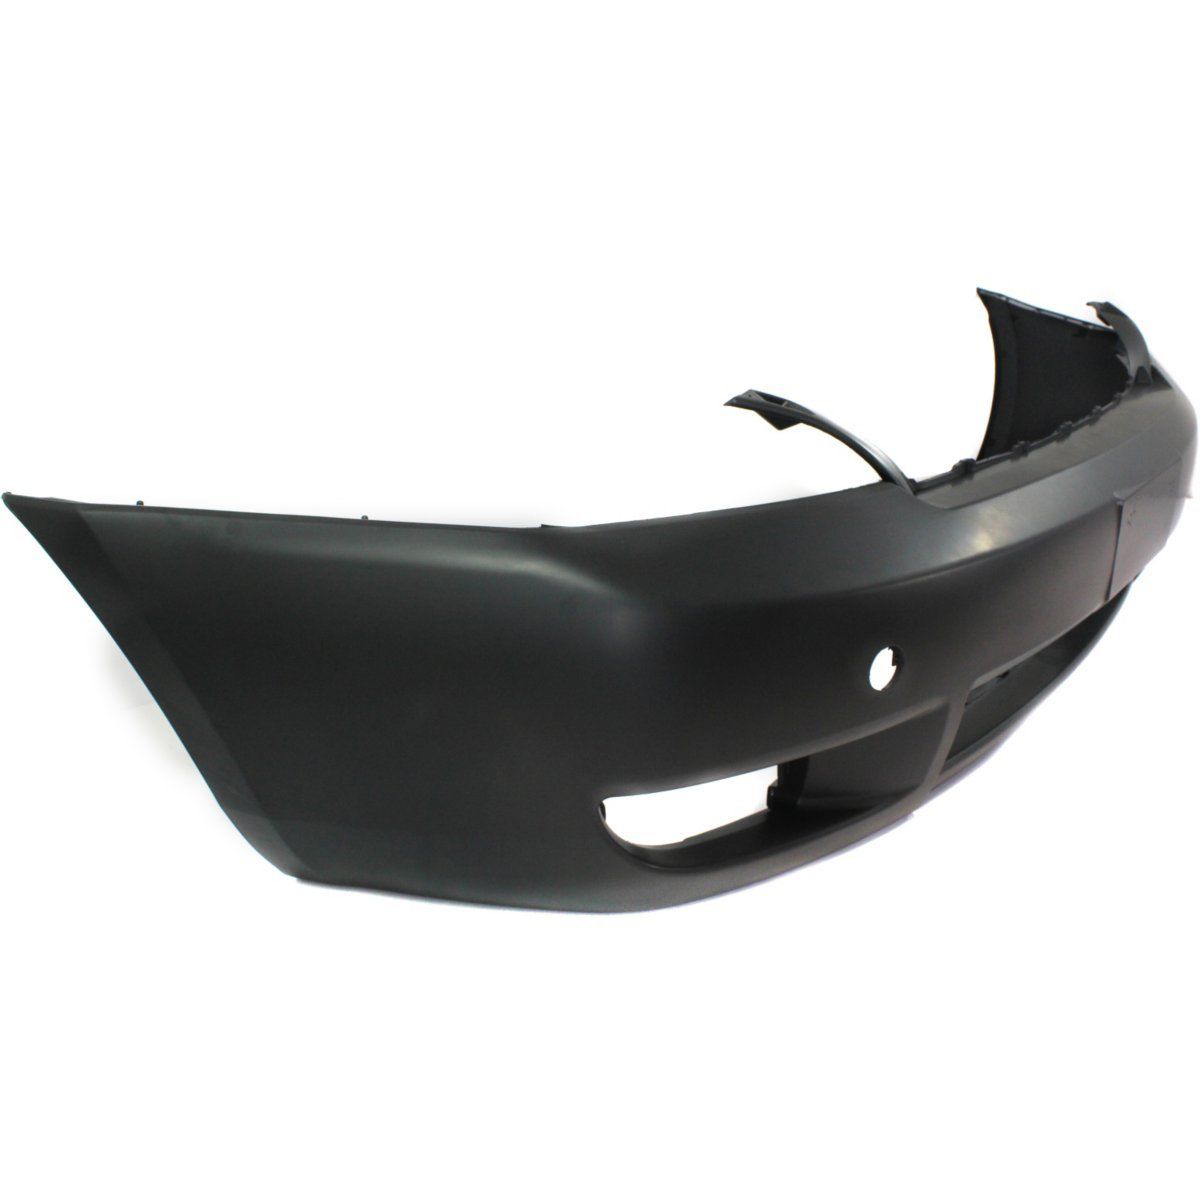 2006-2012 KIA SEDONA Front Bumper Cover w/Sport Pkg Painted to Match